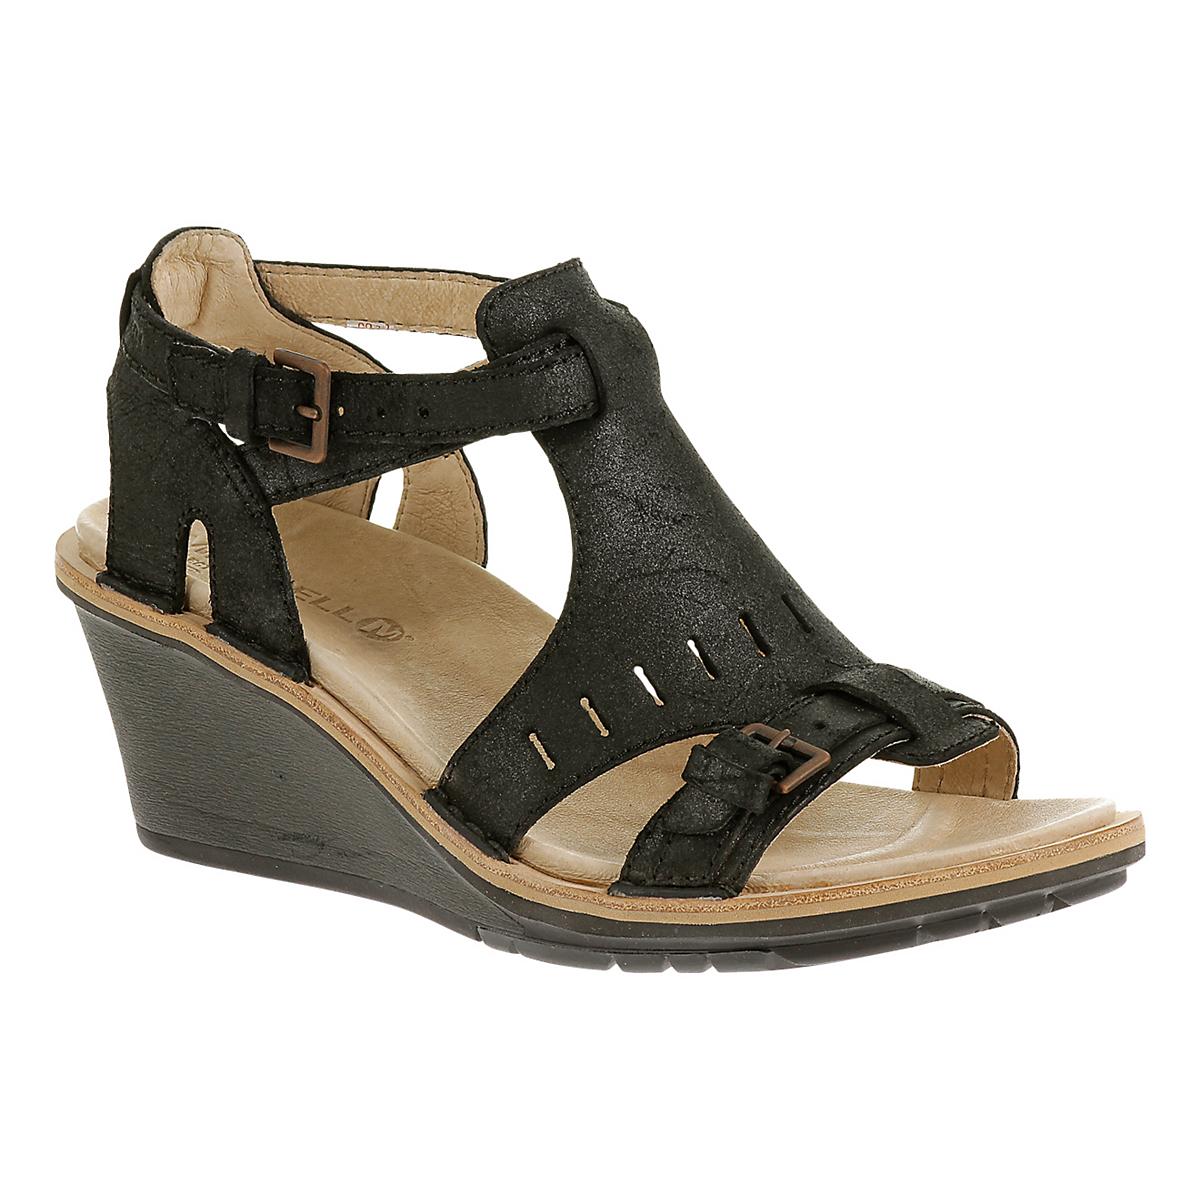 Womens Merrell Swivel Leather Sandals Shoe at Road Runner Sports